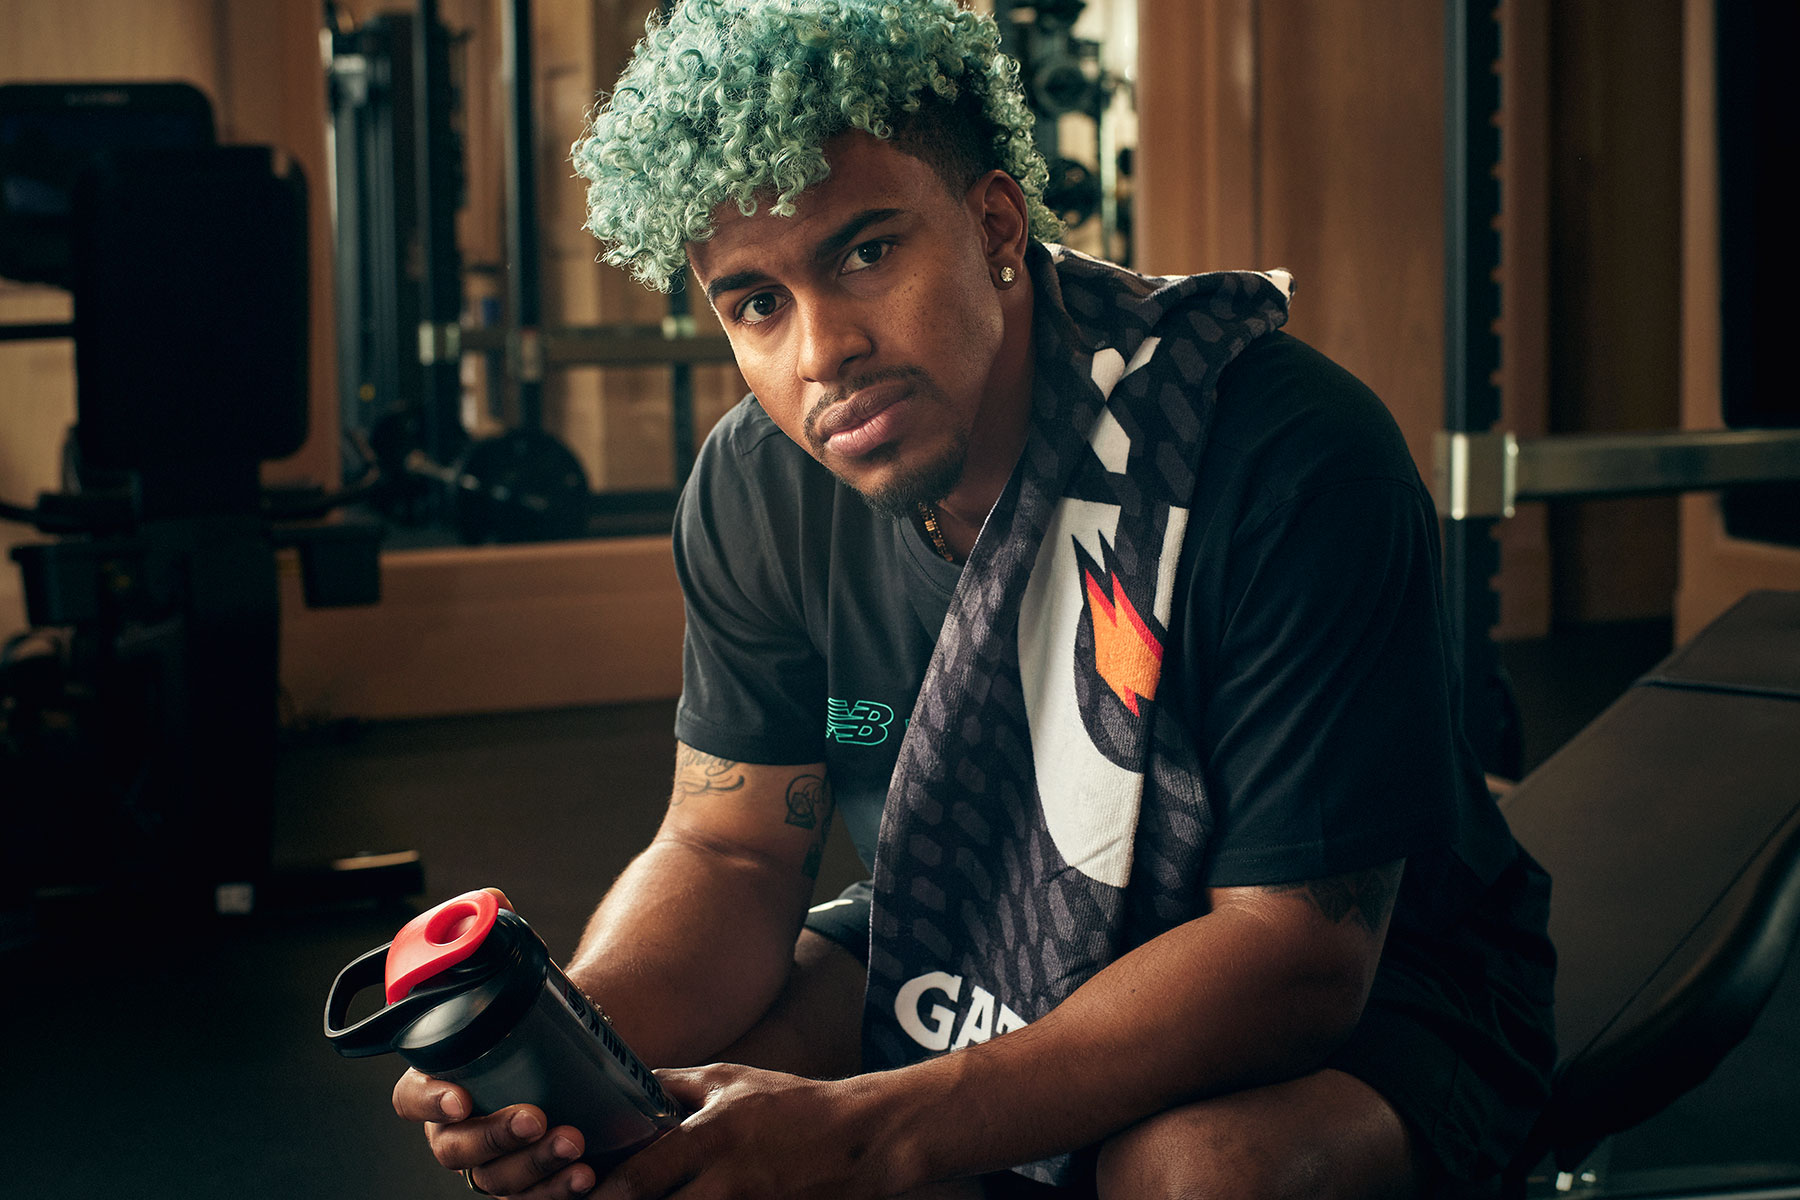 Francisco Lindor photographed by Scott Council